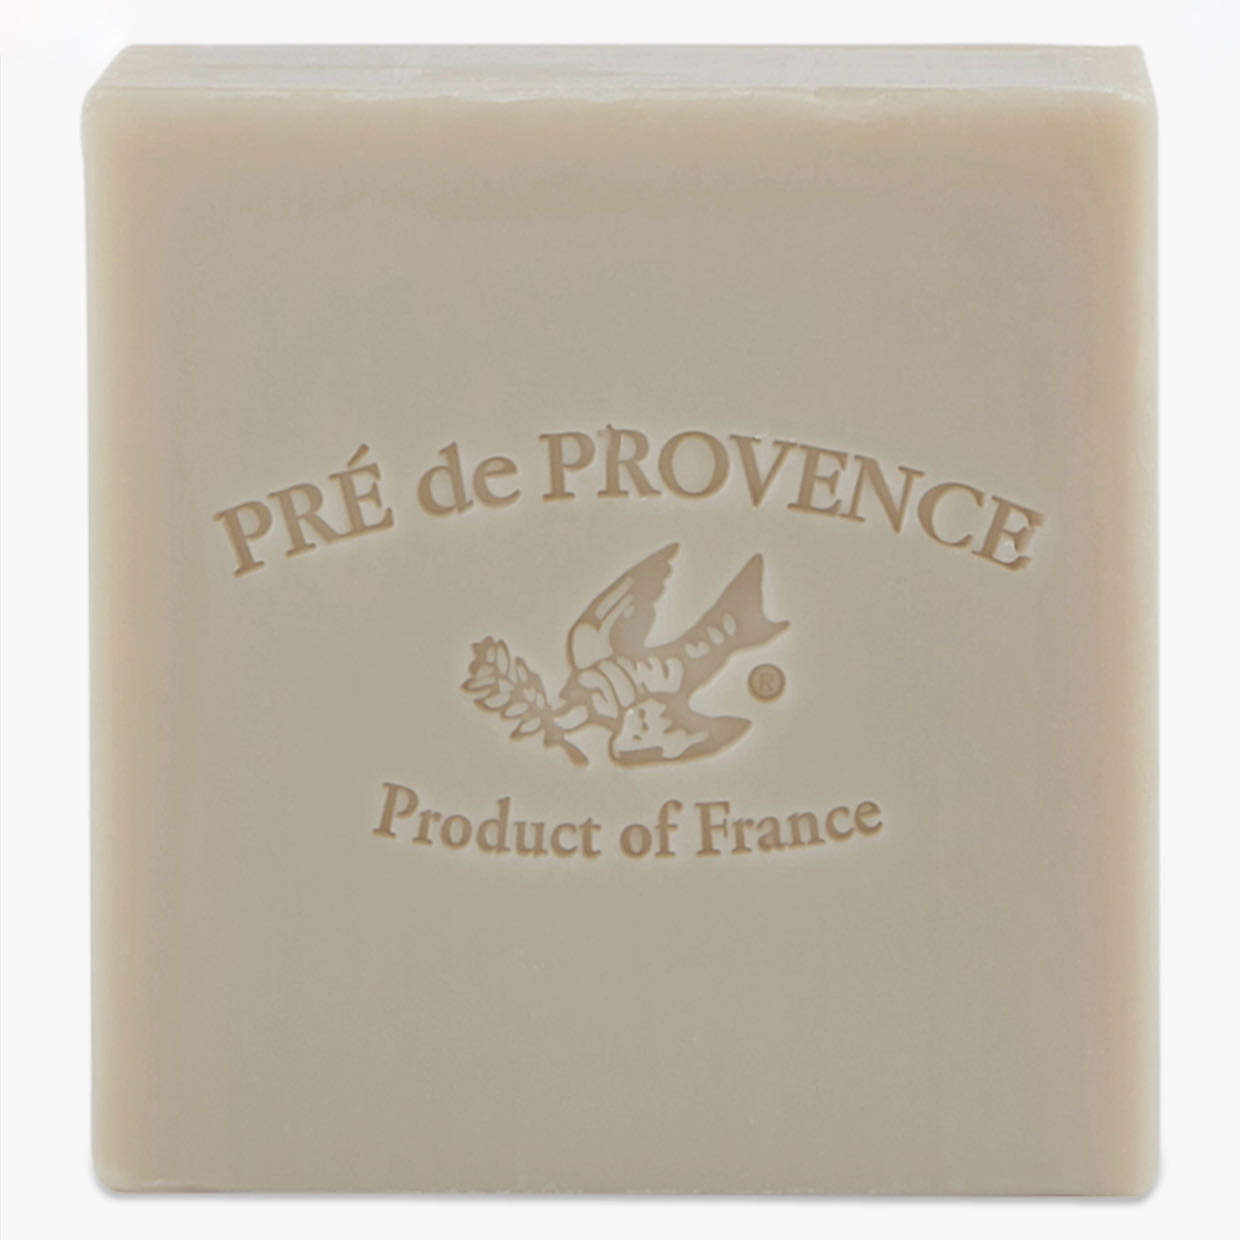 No. 63 Shea Butter Enriched Traditional Artisanal French Soap - B